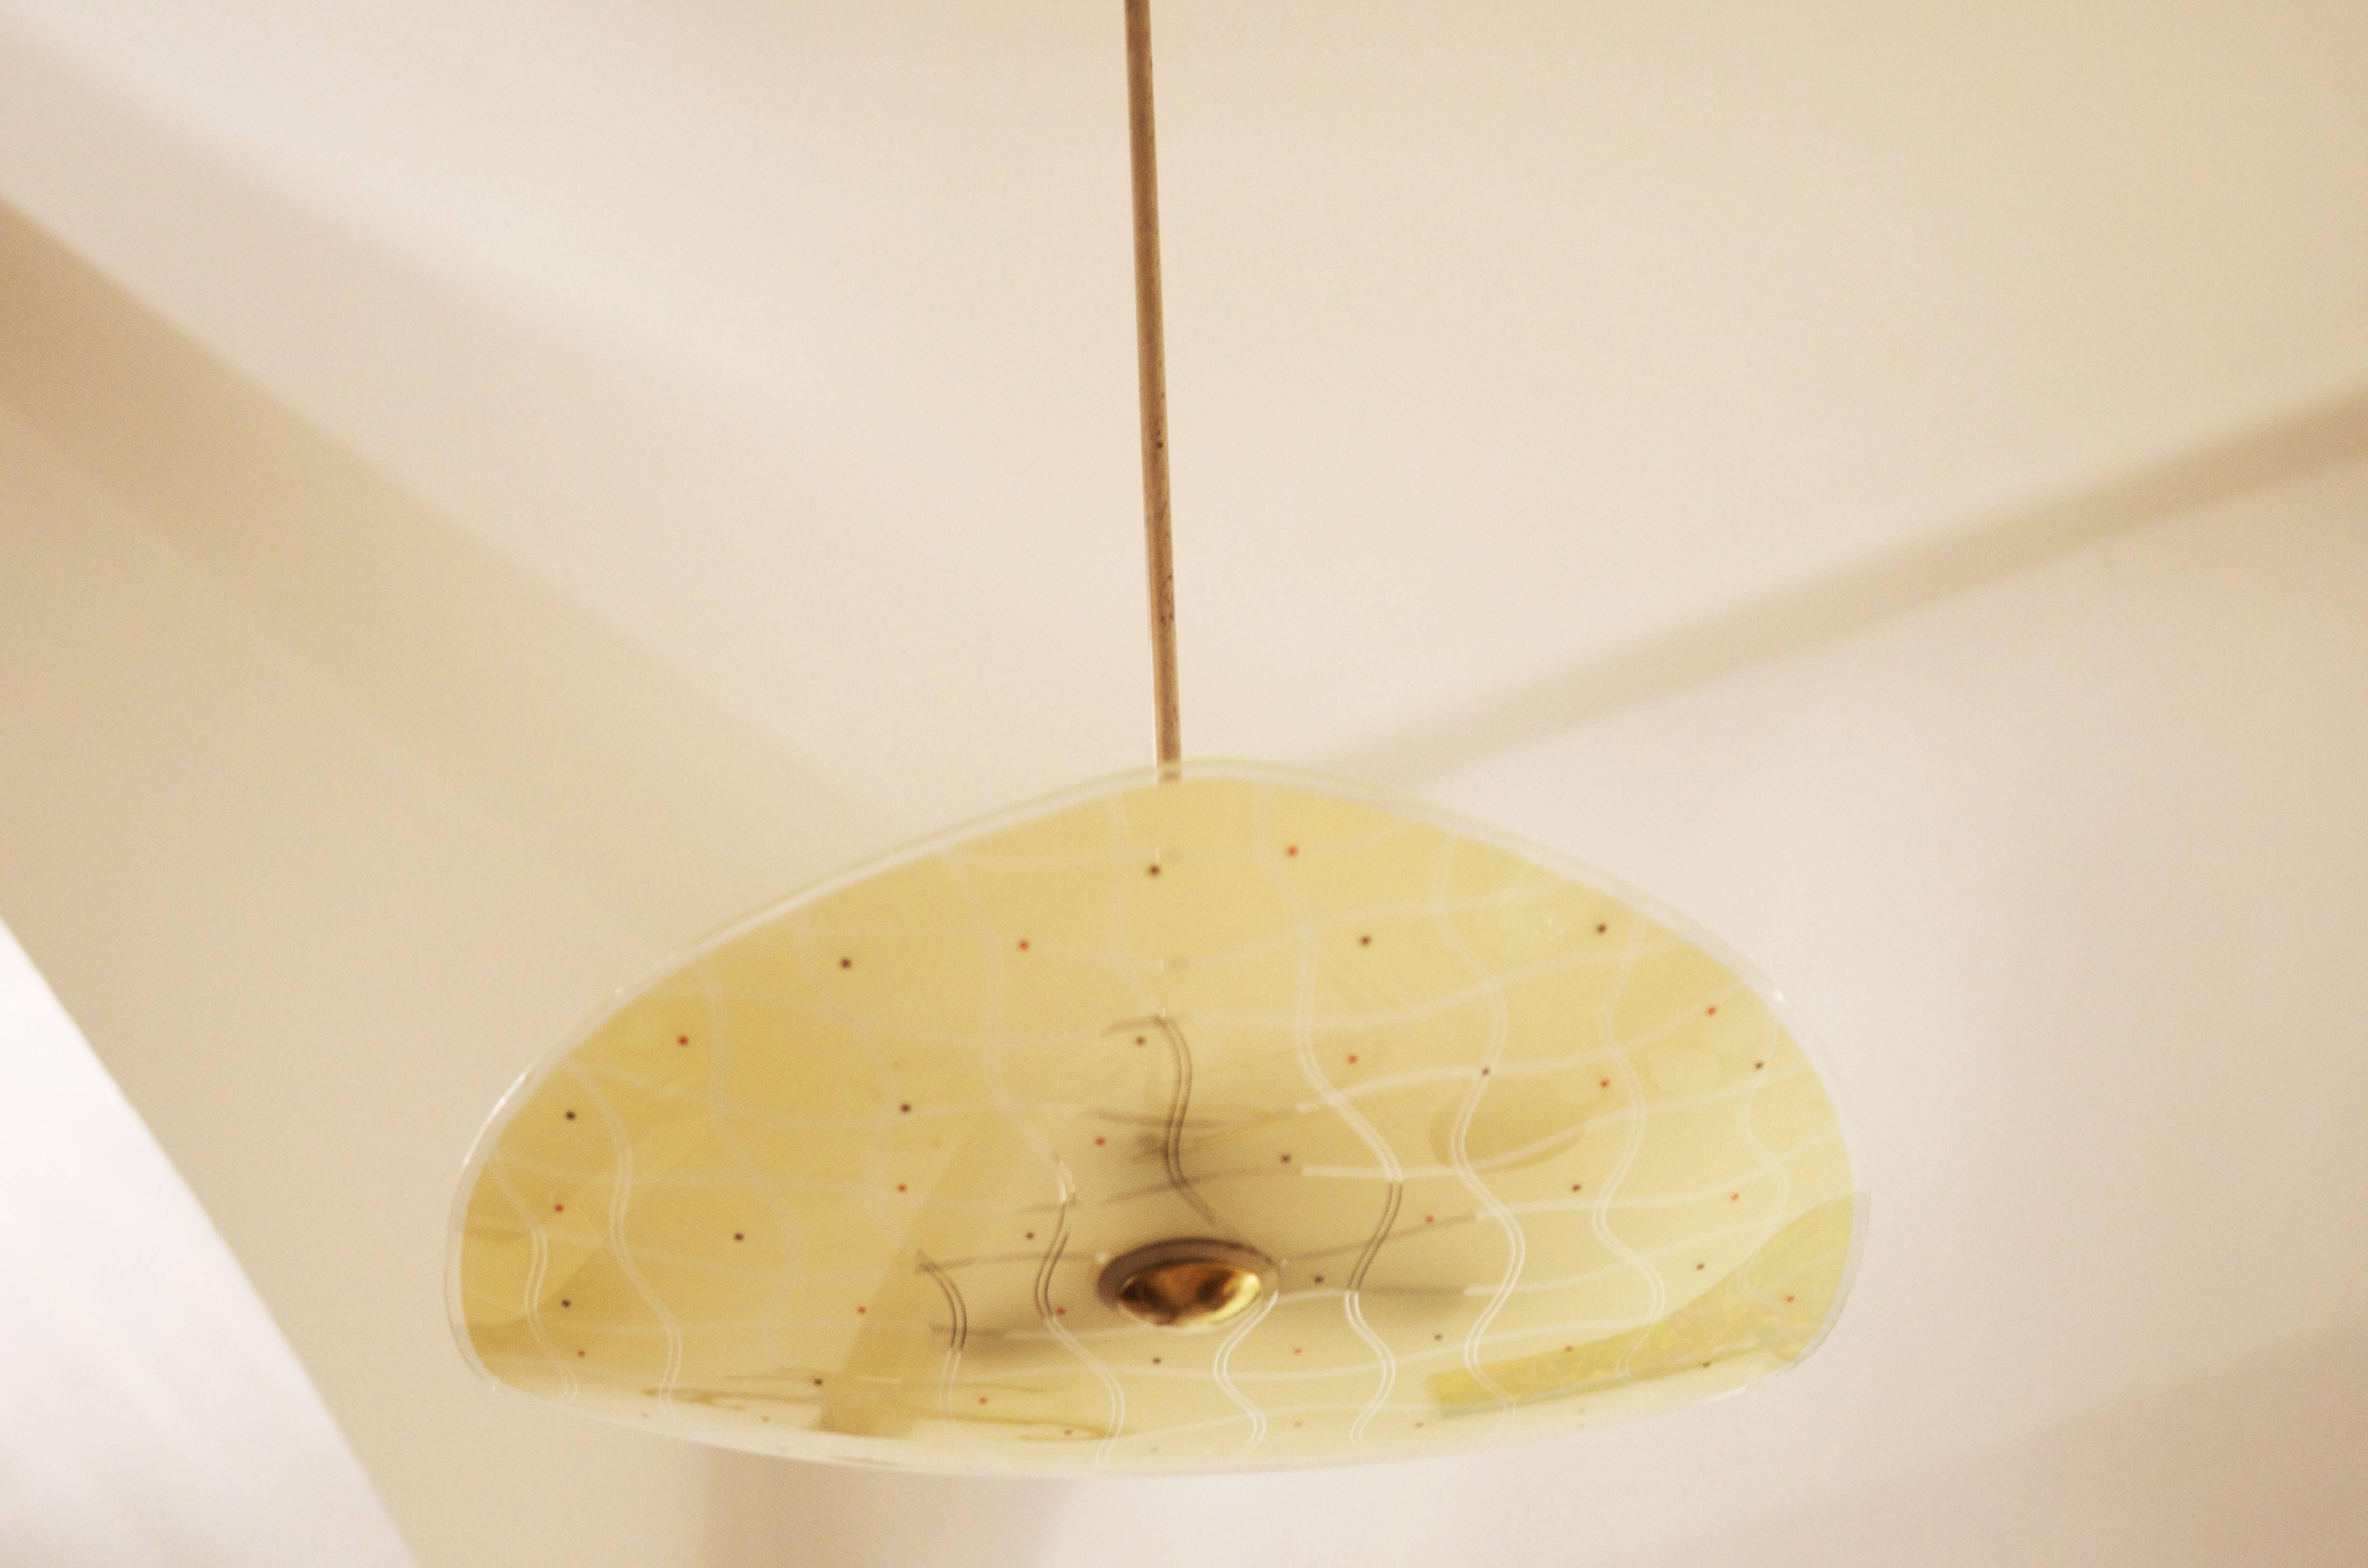 Czech Midcentury Glass Pendant Lamp for Brussels World Expo, 1958 In Excellent Condition For Sale In Vienna, AT